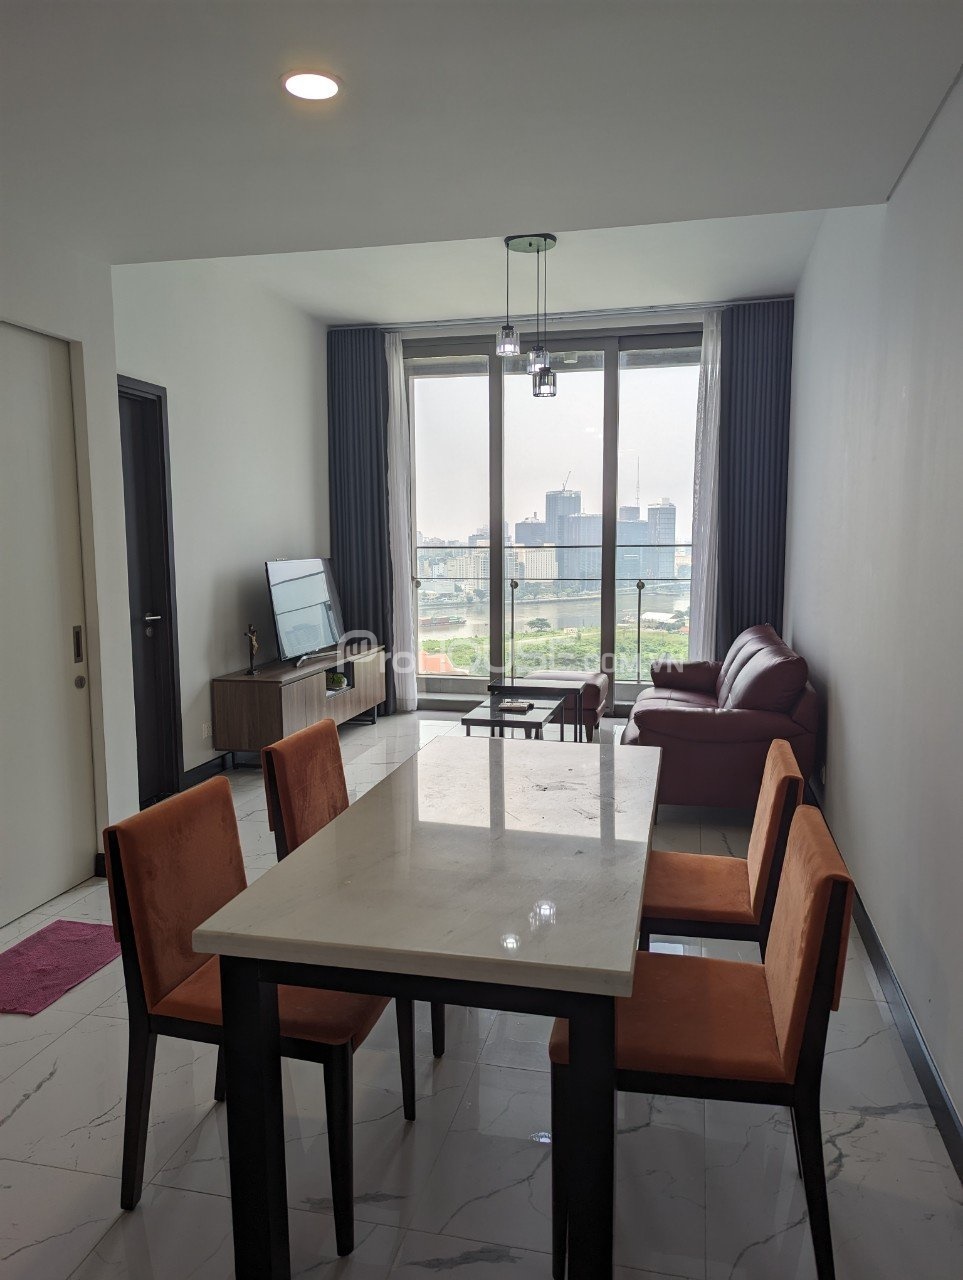 River view 1 bedroom apartment for rent in Empire City with full furniture